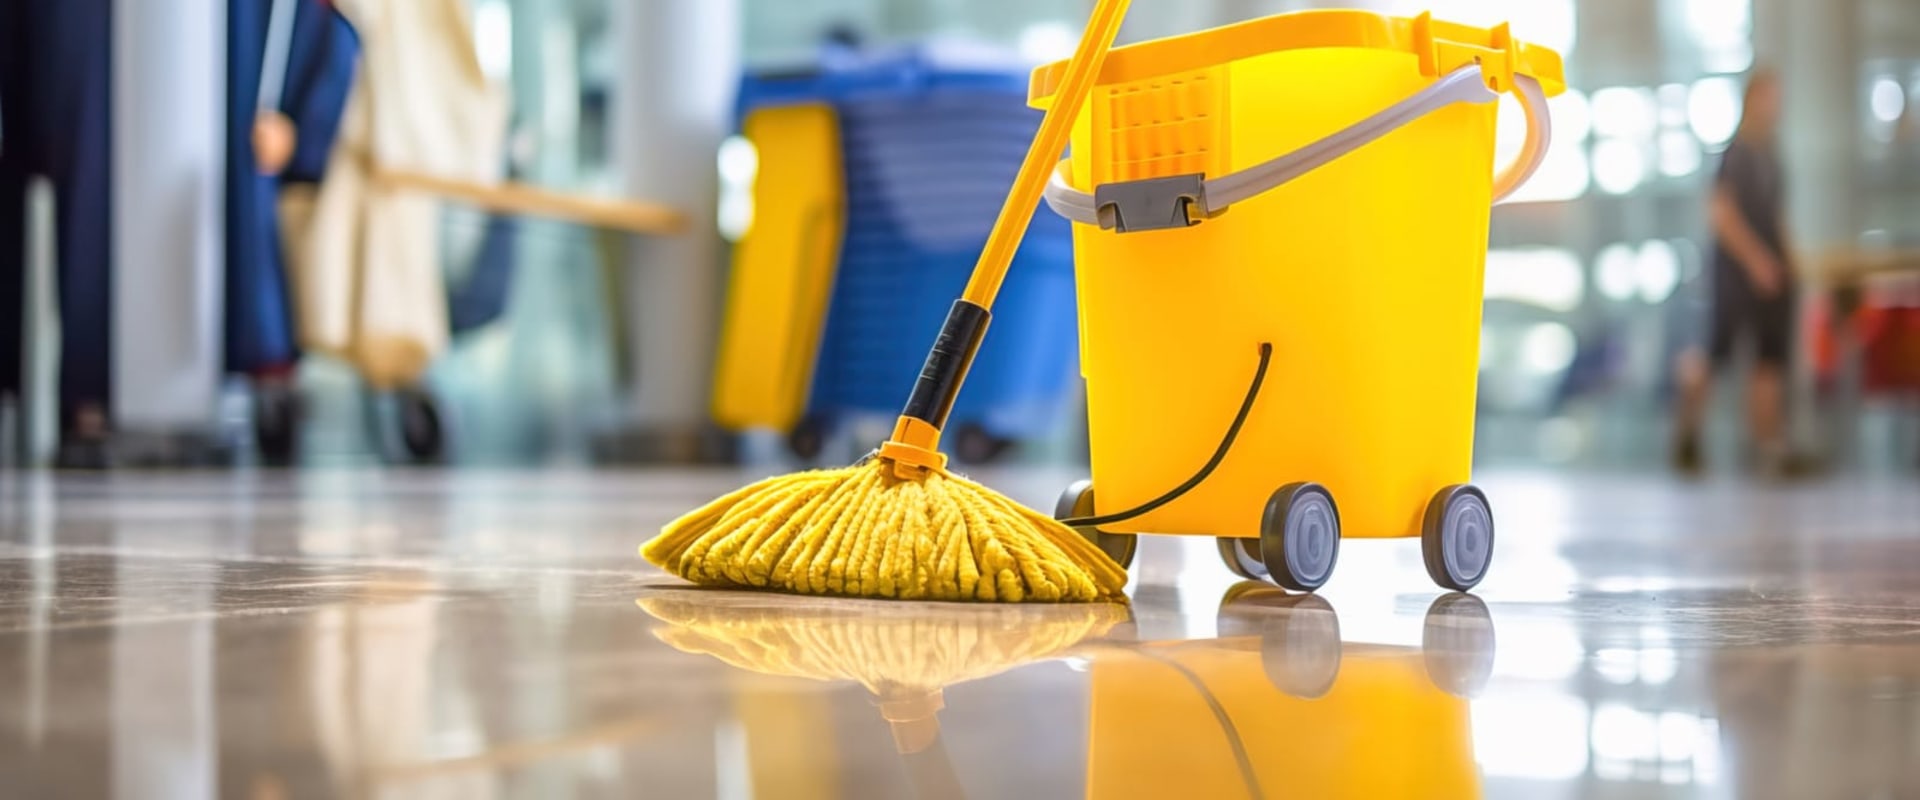 Maid Services Vs. Commercial Cleaners: The Best Choice For Your Minneapolis Business